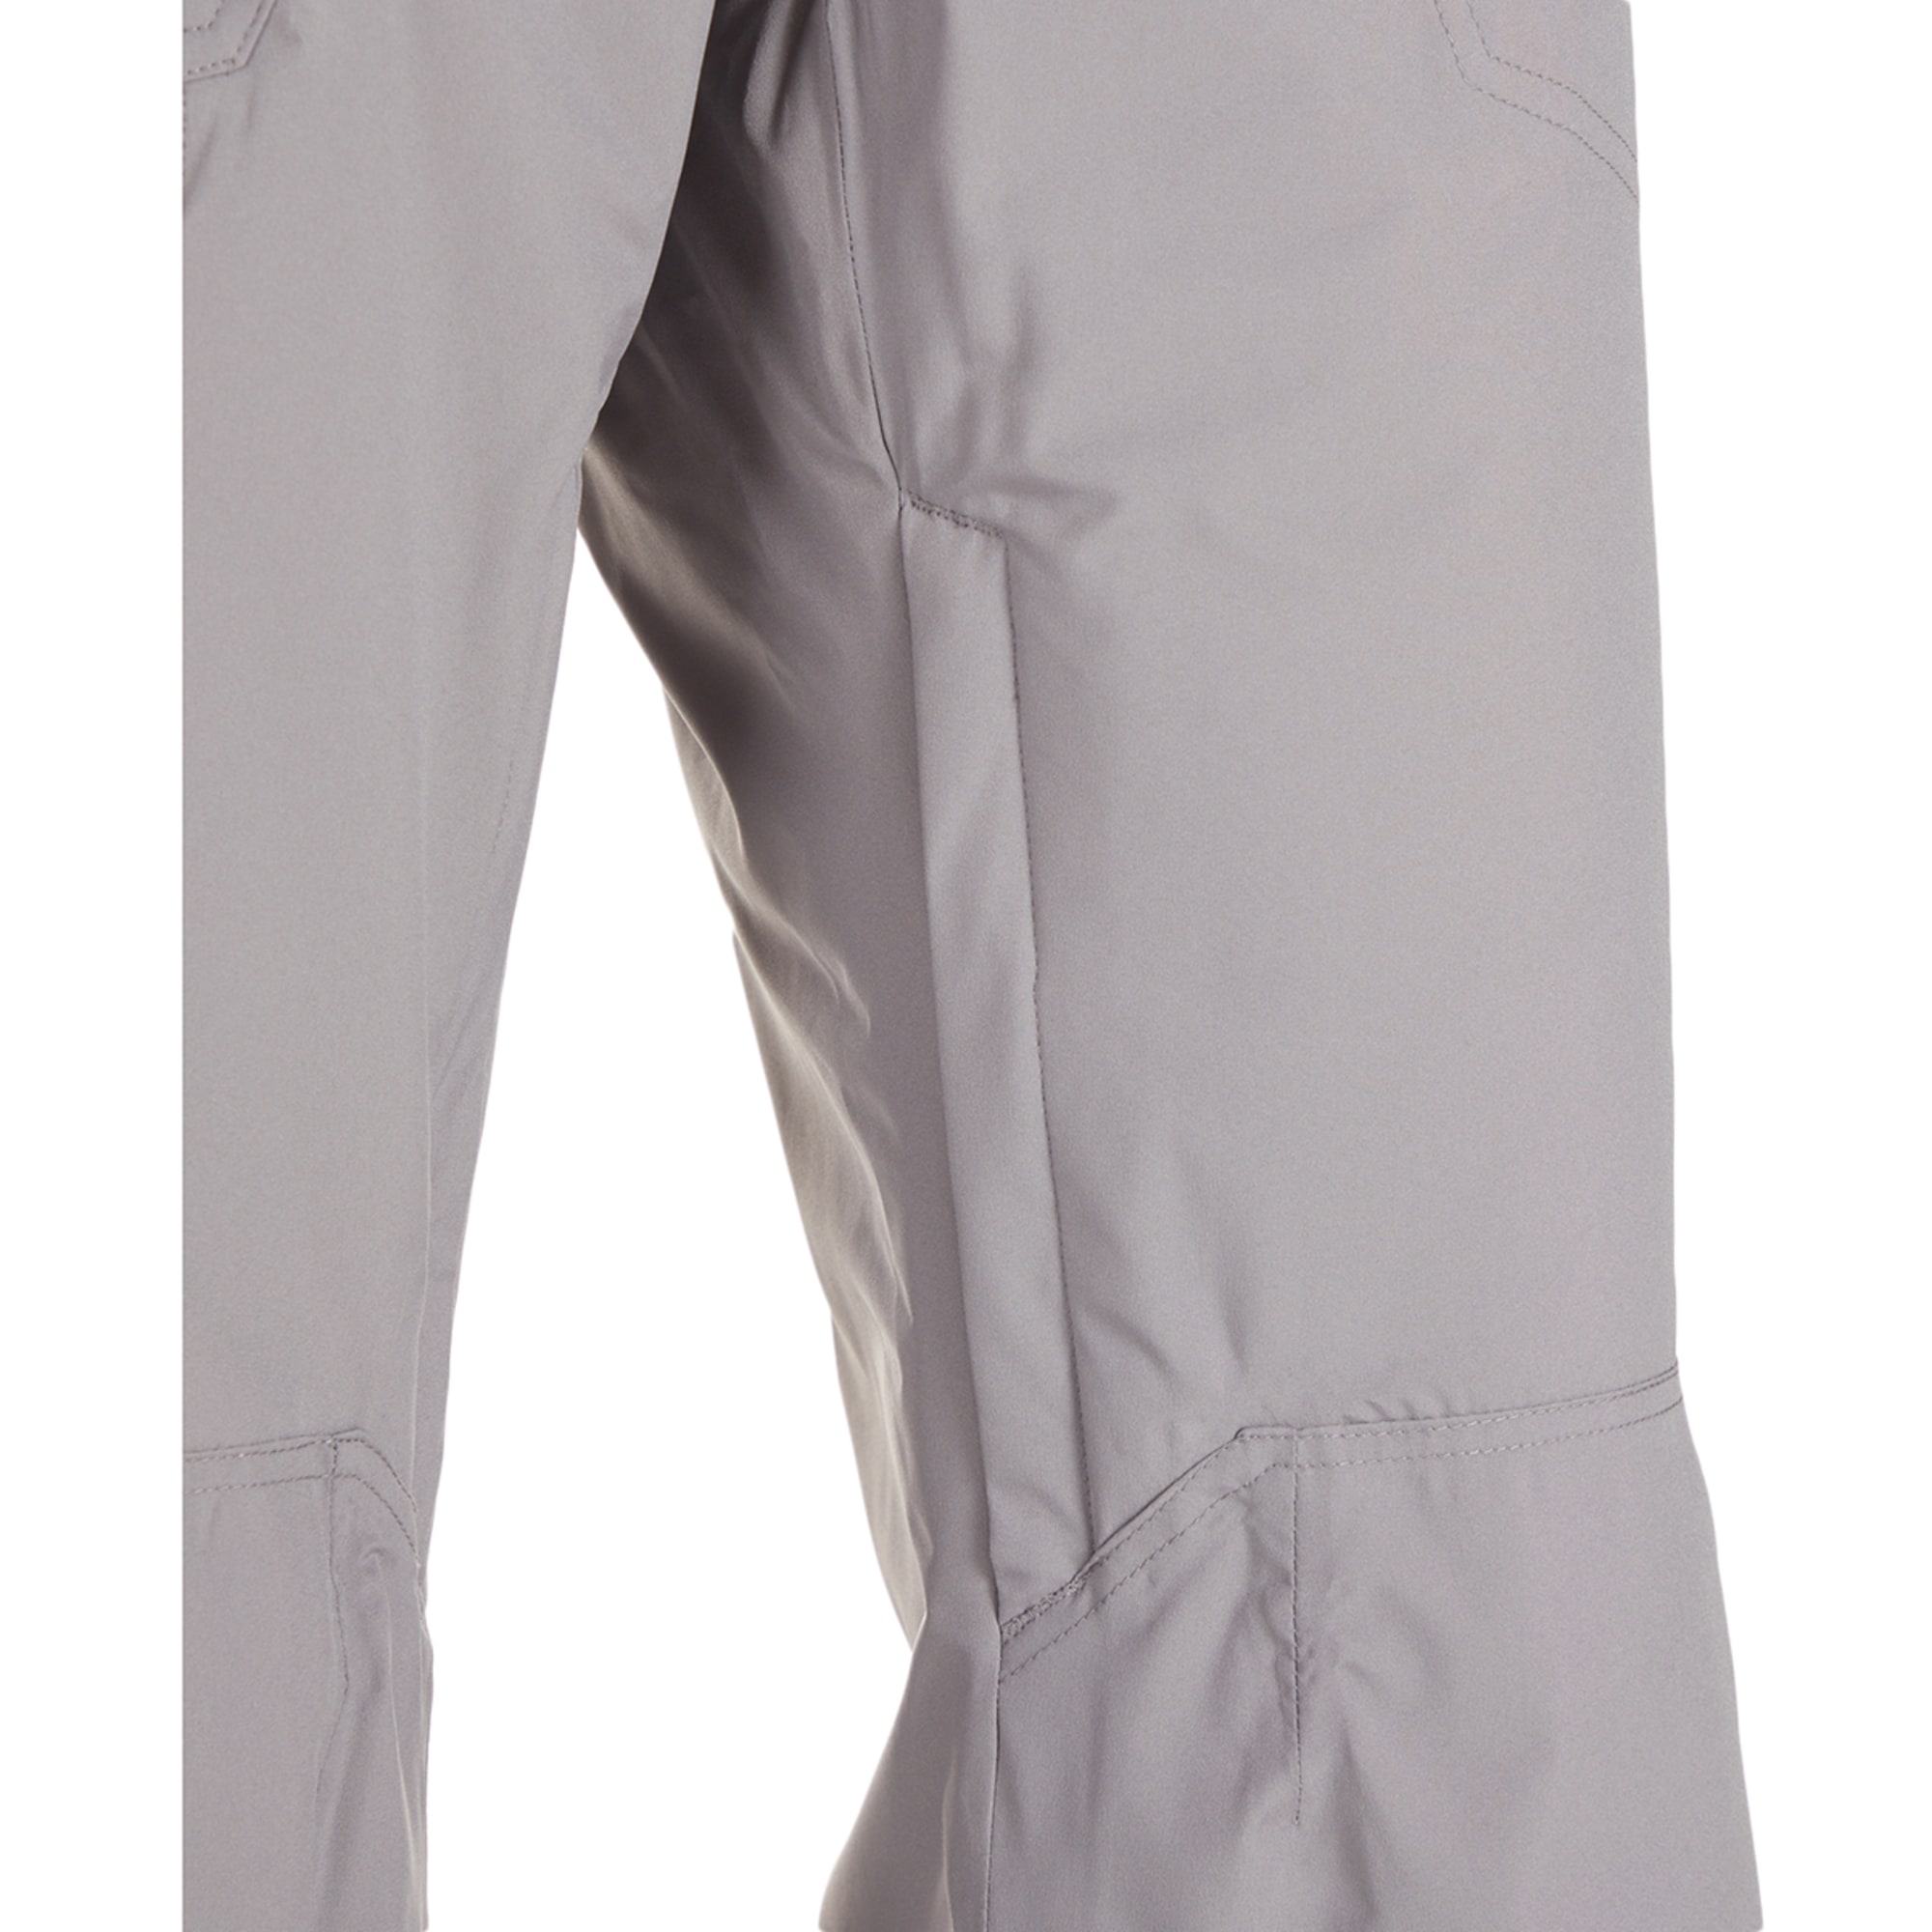 EMS Men's Expedition Insulated Pants